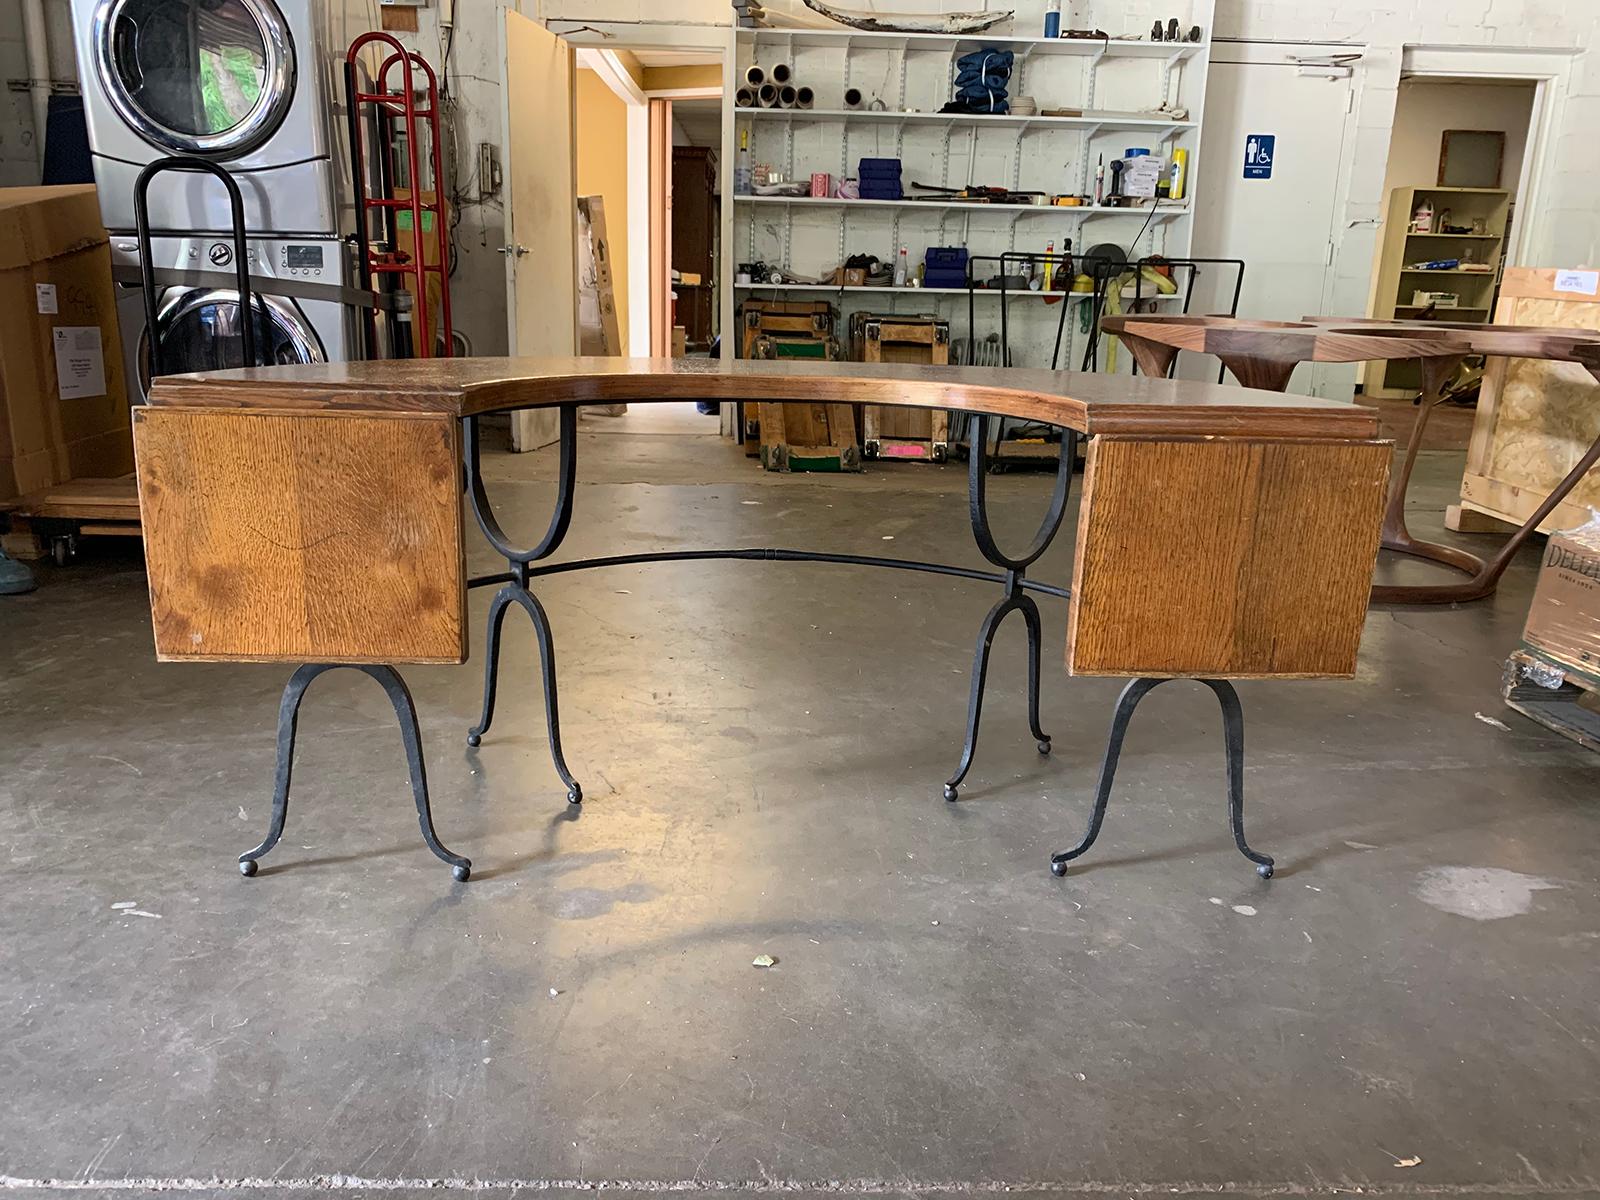 Mid-20th century iron and oak U-shaped desk, two drop leaves
Measures: 63